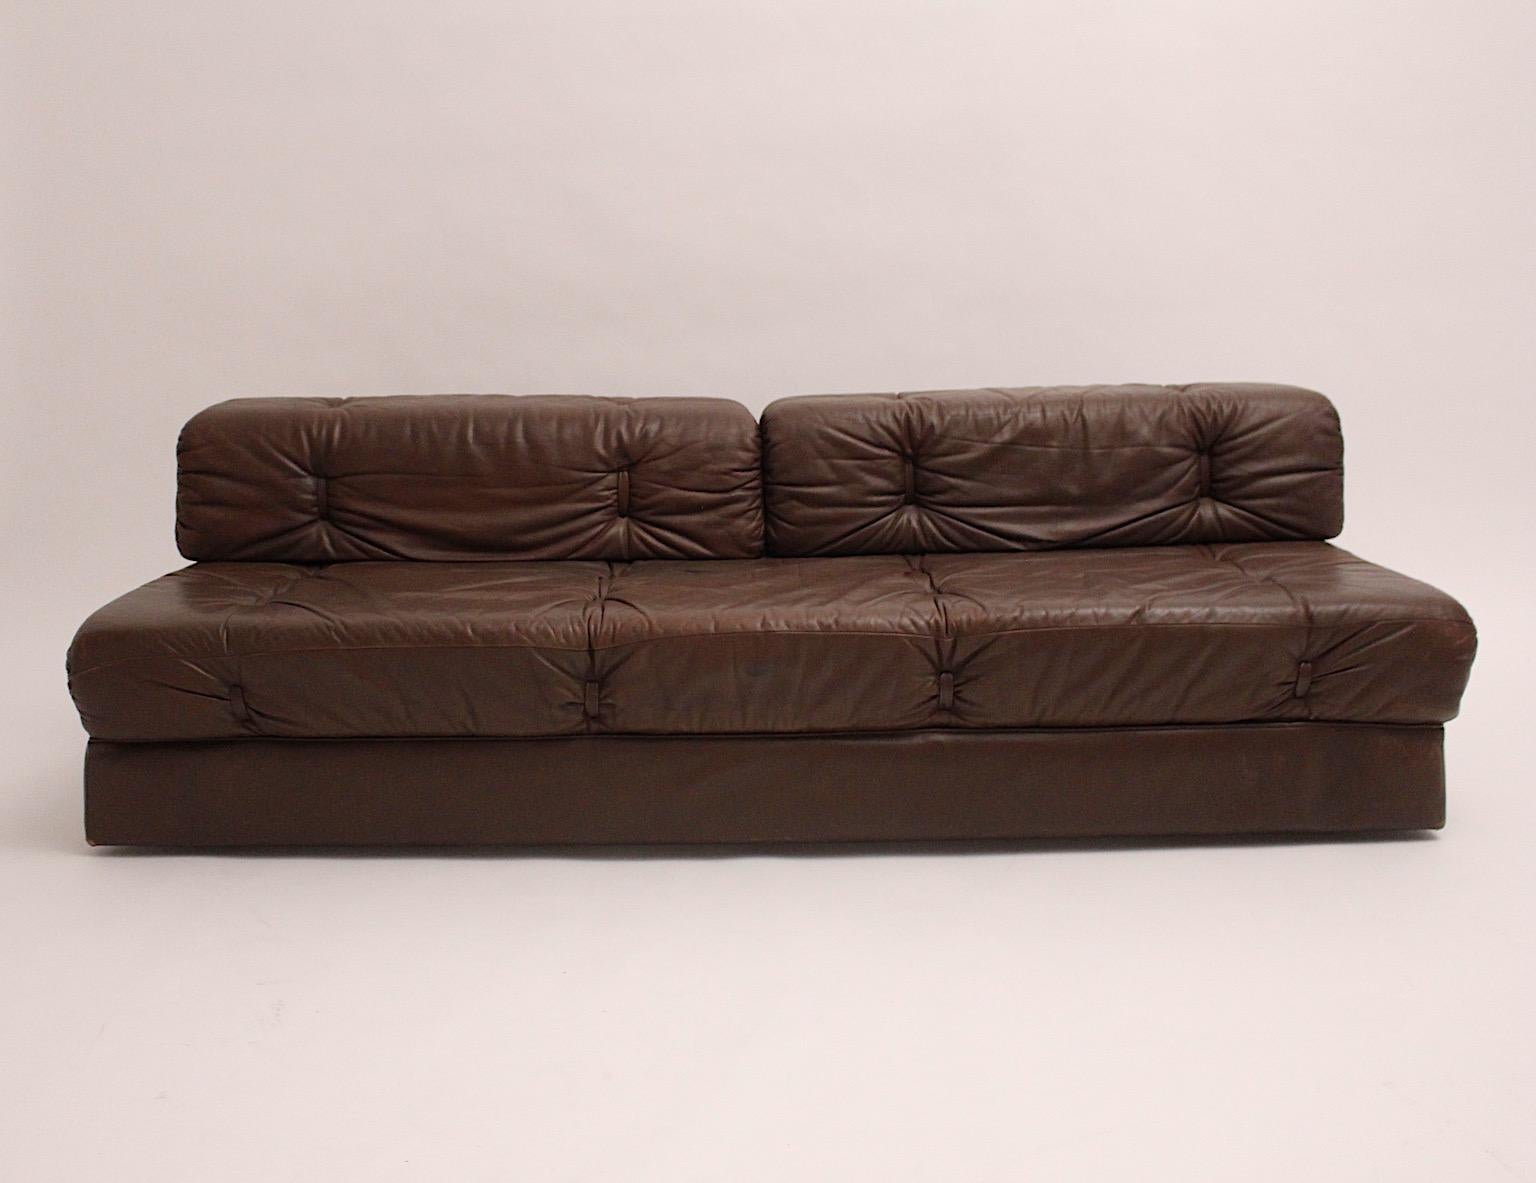 20th Century Wittmann Leather Brown Vintage Sofa or Daybed Atrium De Sede Style 1970s Austria For Sale